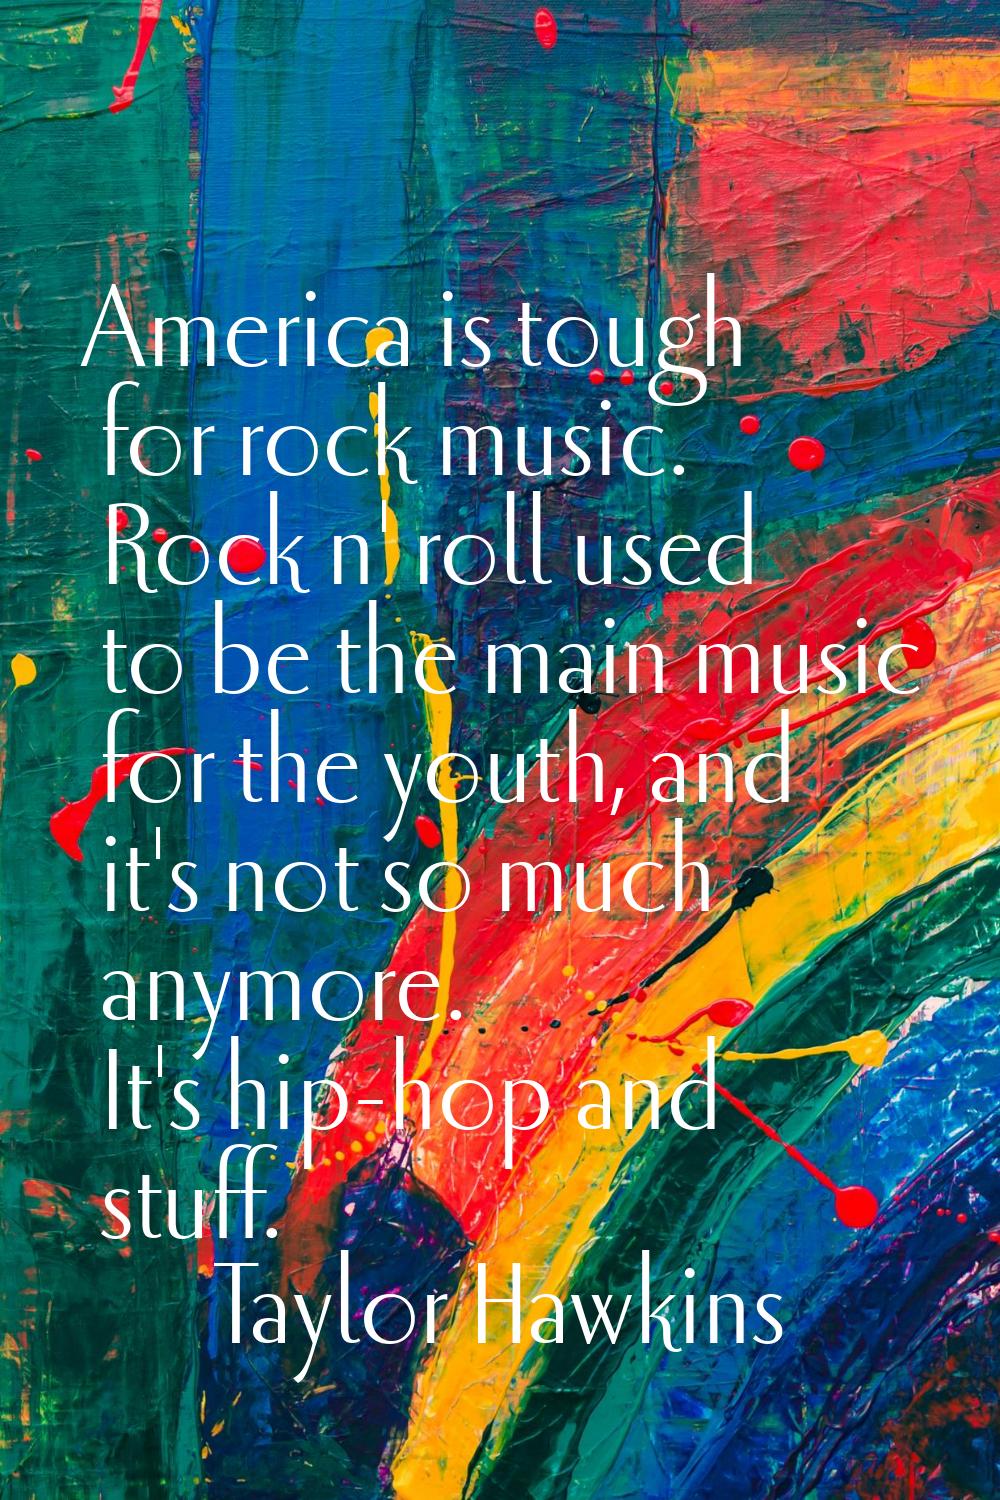 America is tough for rock music. Rock n' roll used to be the main music for the youth, and it's not